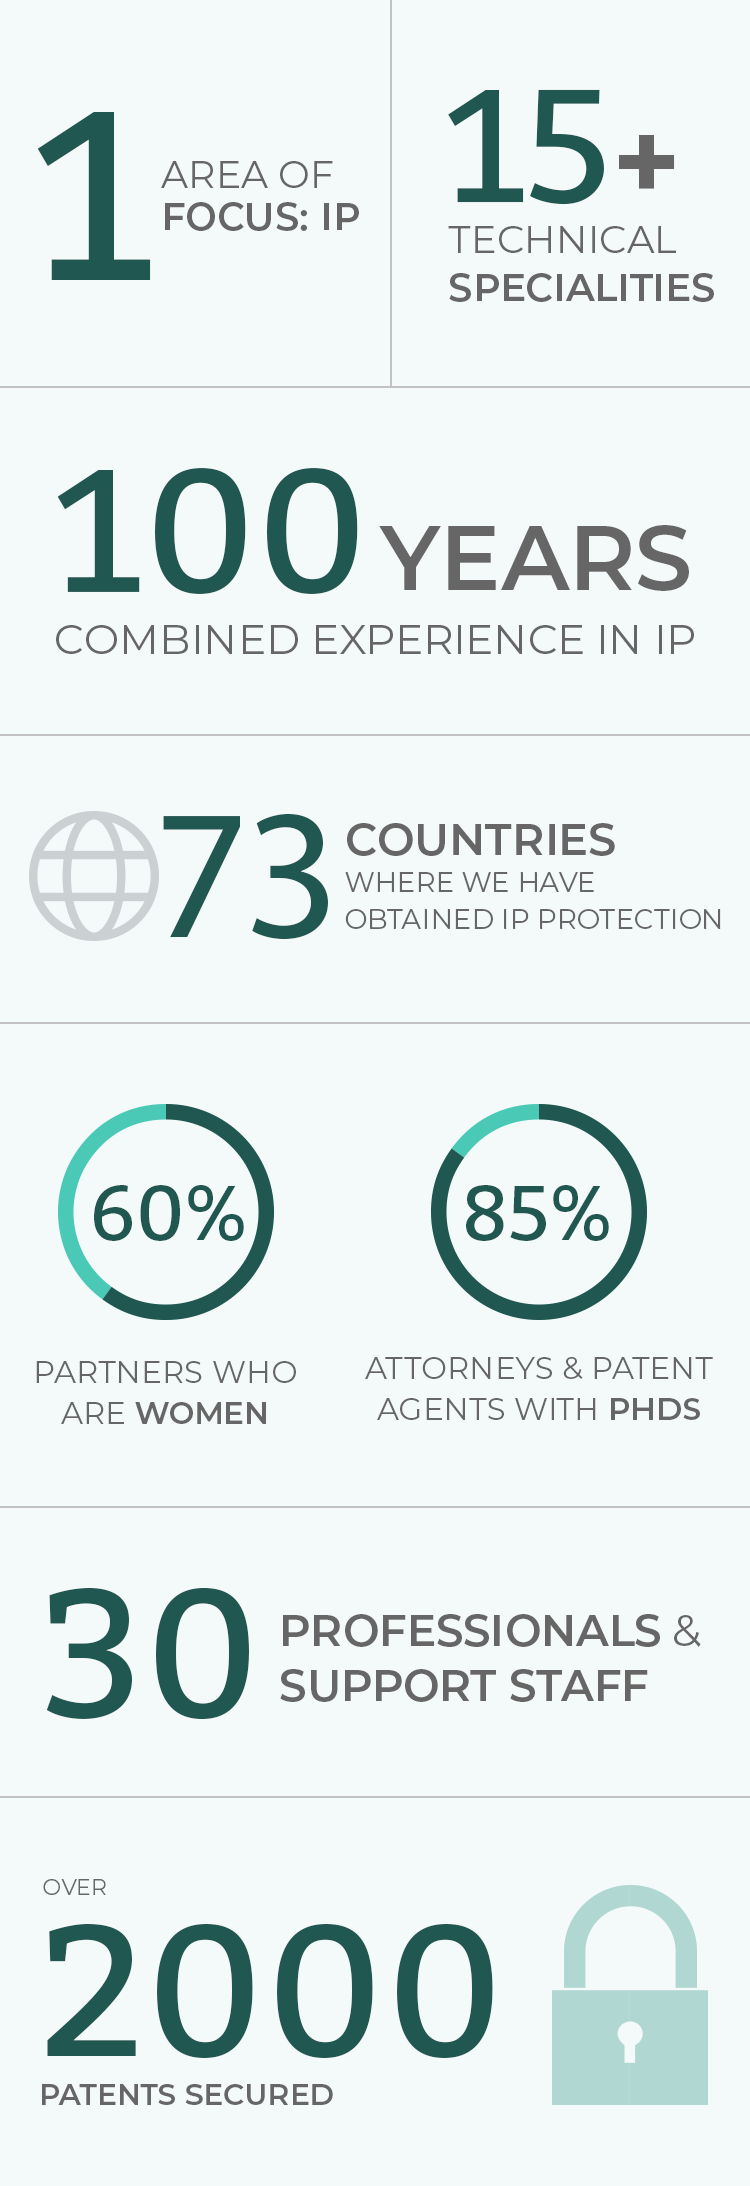 Graphic that reads: 1 area of focus: IP. 100 years of combined experience in IP. 15+ technical specialties. 60% of our partners are women. 85% of our attorneys and patent agents have PHds. We have obtained IP protection in 73 countries and secured over 2000 patents. We have 30 professionals and support staff.